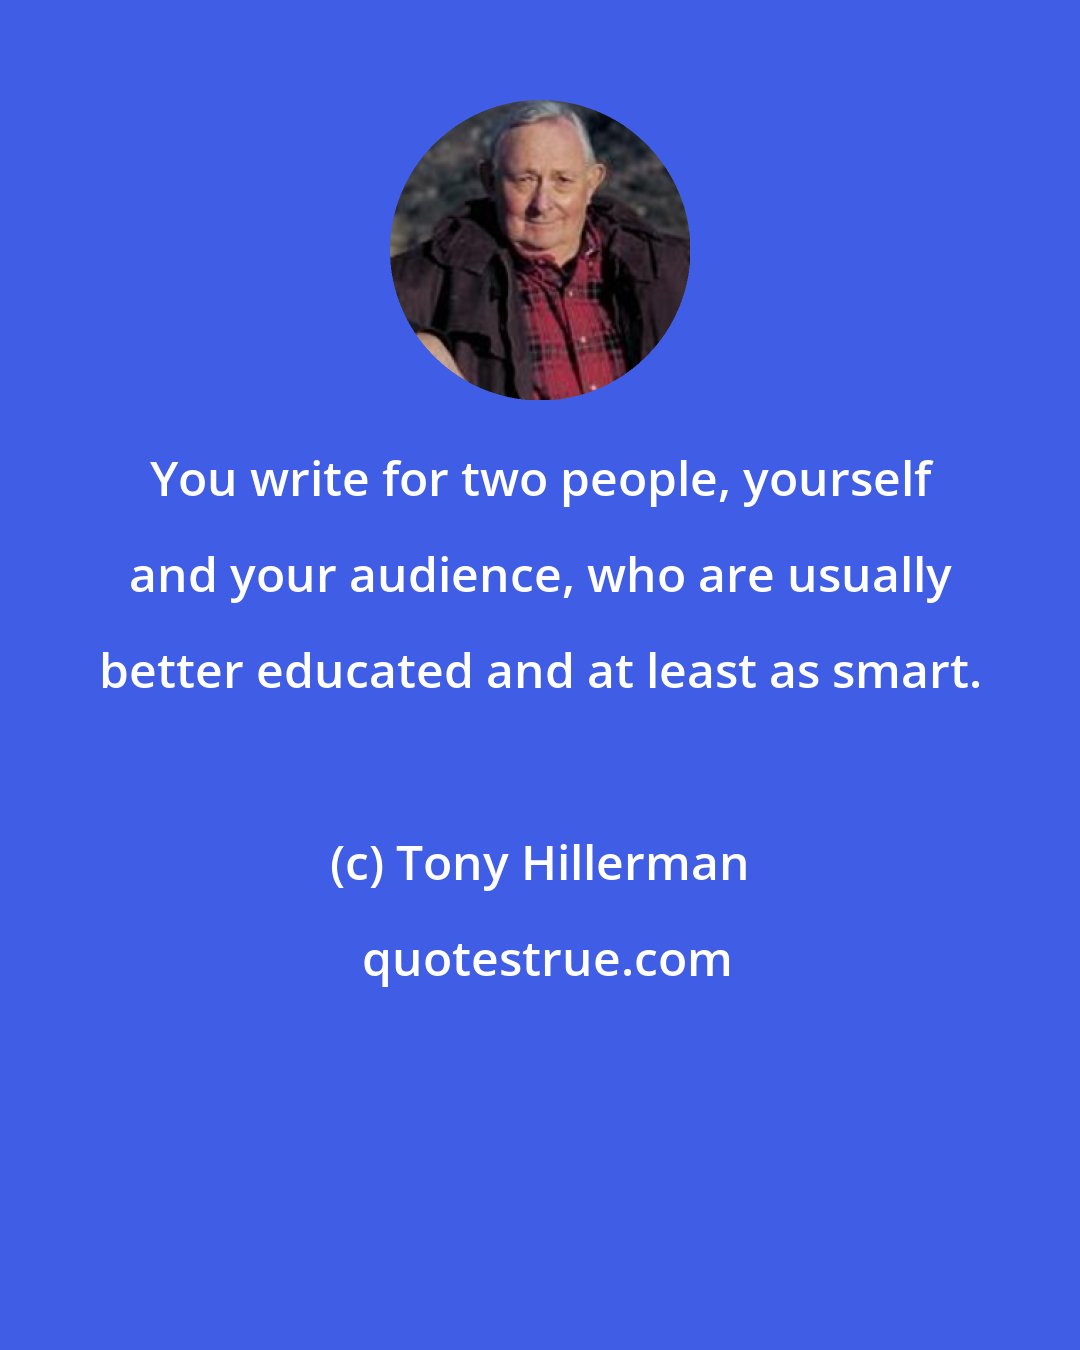 Tony Hillerman: You write for two people, yourself and your audience, who are usually better educated and at least as smart.